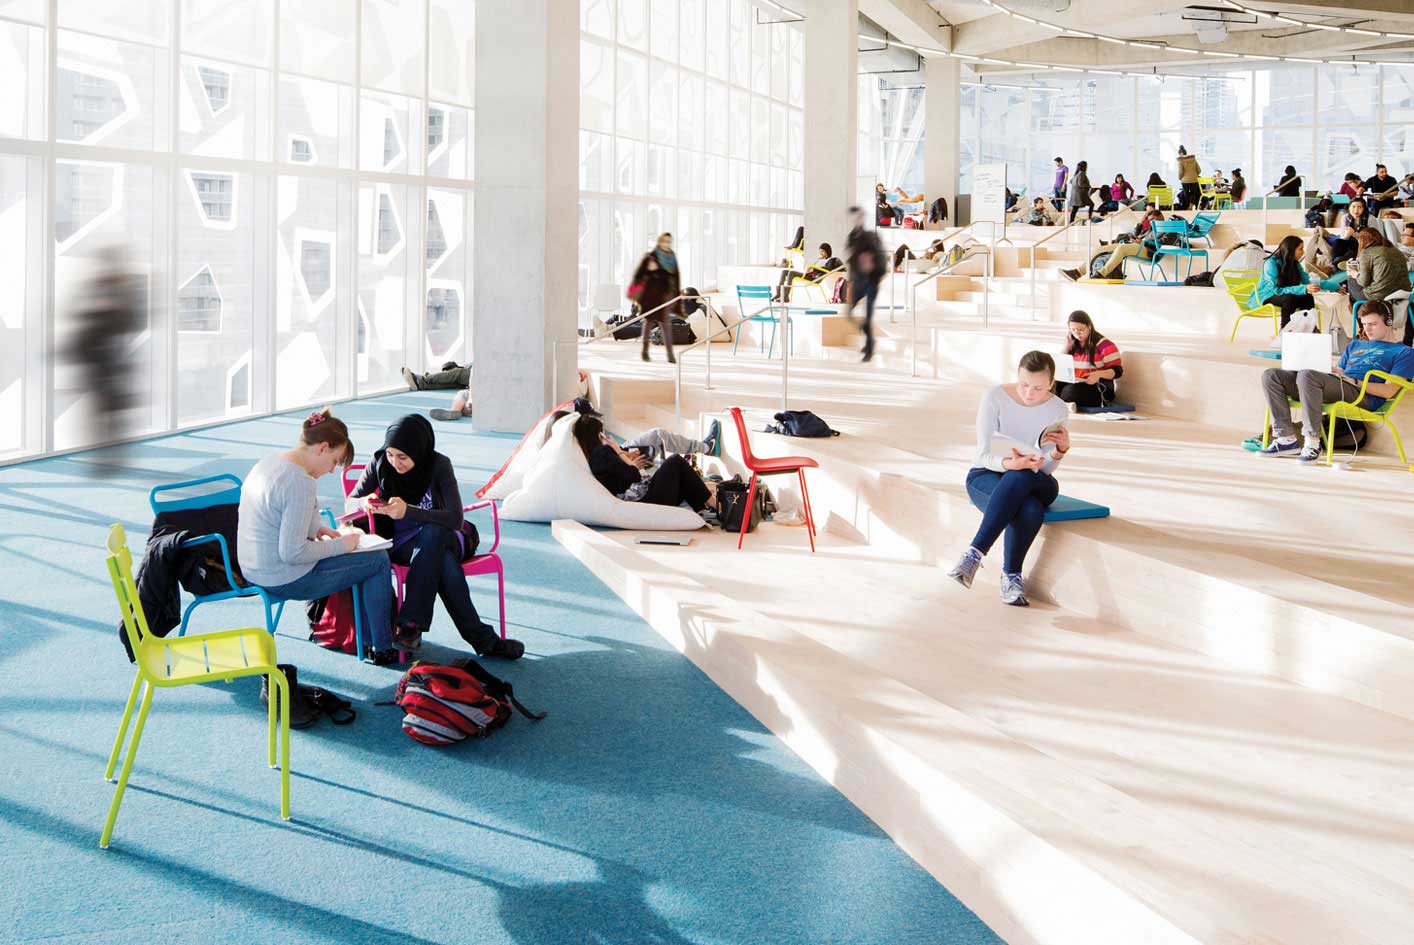 Students scattered around on the beach floor of the Student Learning Centre, bright and airy